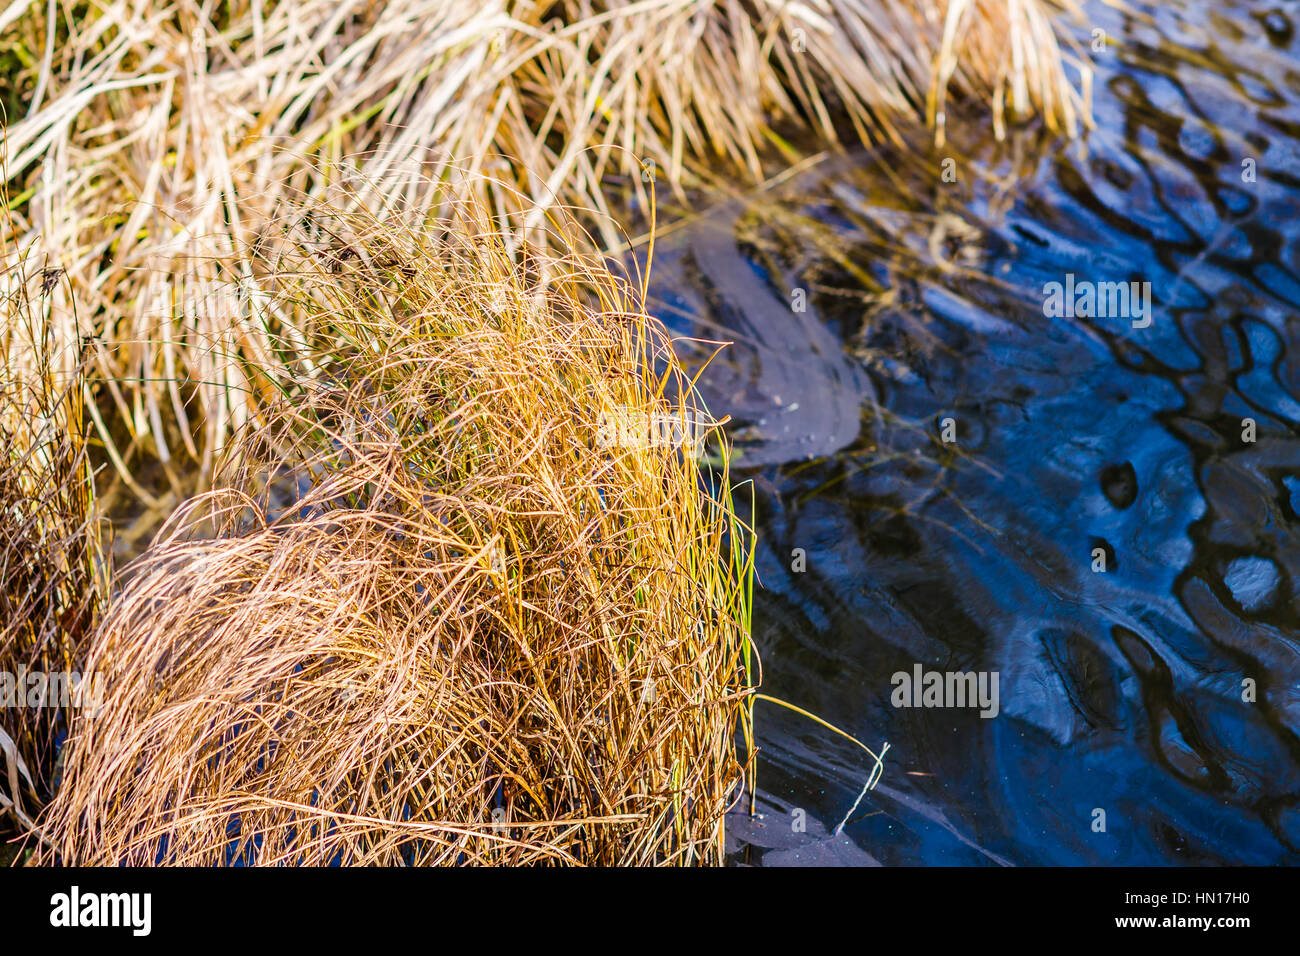 Dry ling, reed, carex, plants in the cold water of the autumn river, pond or lake. The end of the autumn. The nature waits for the frost and snow Stock Photo